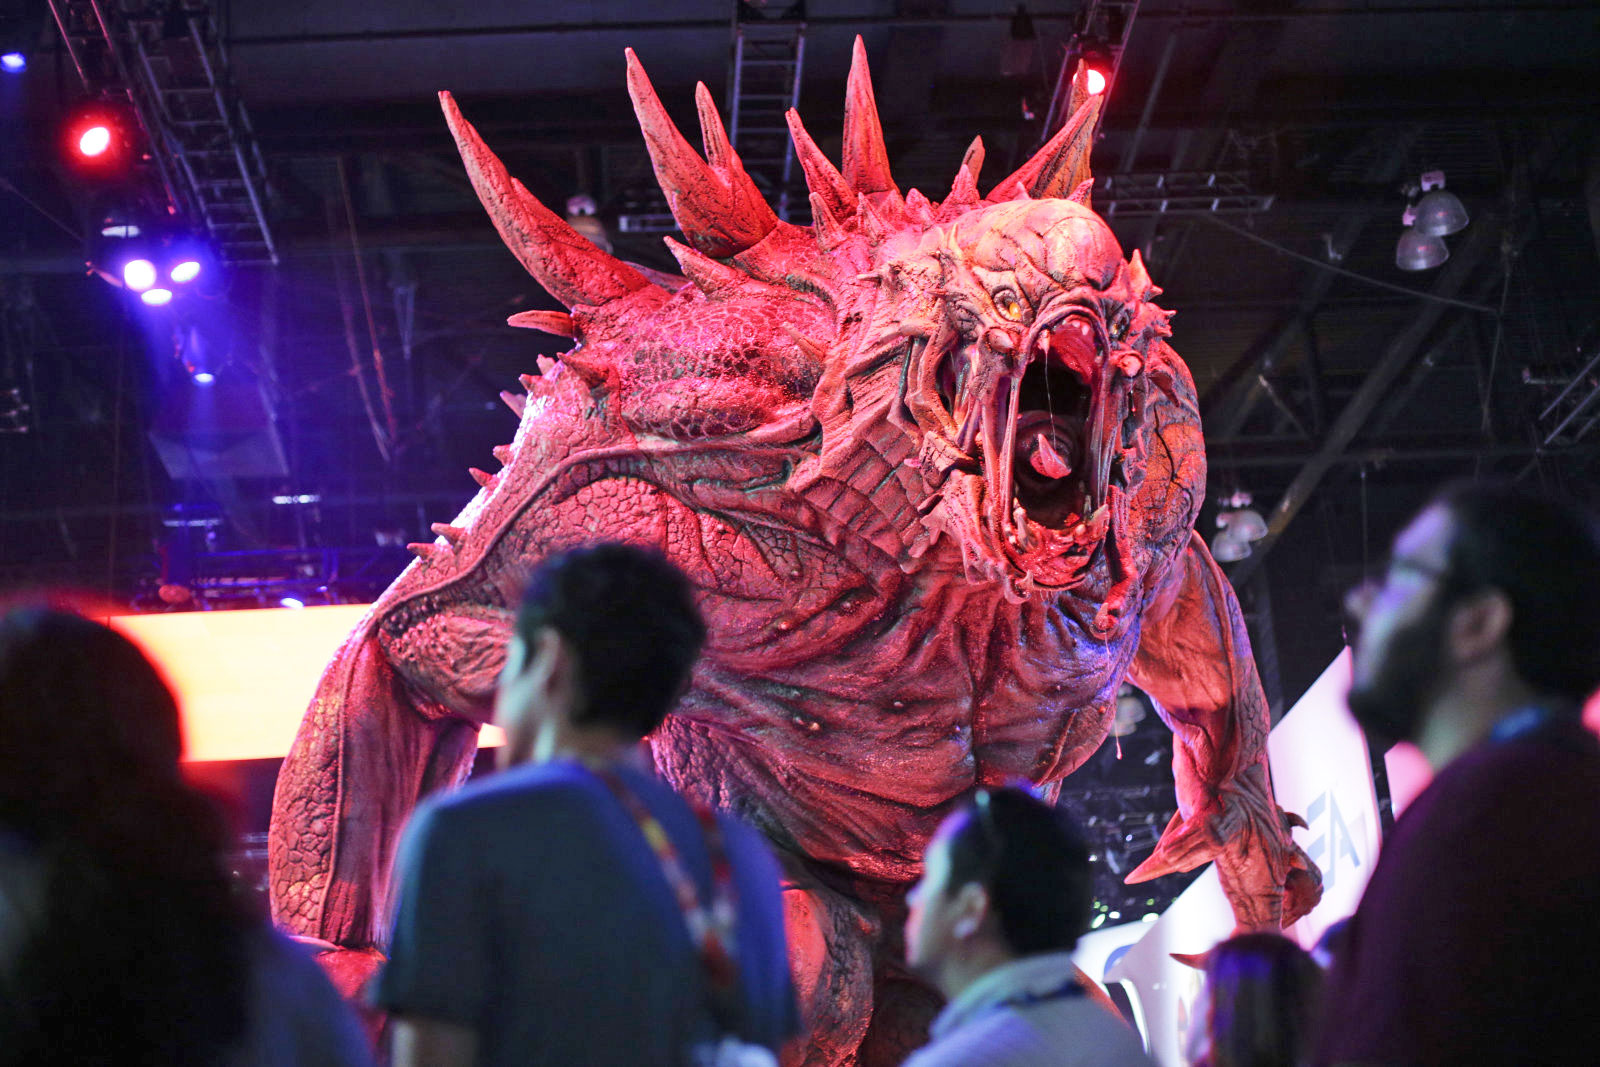 'Evolve' added over a million players by going free-to-play